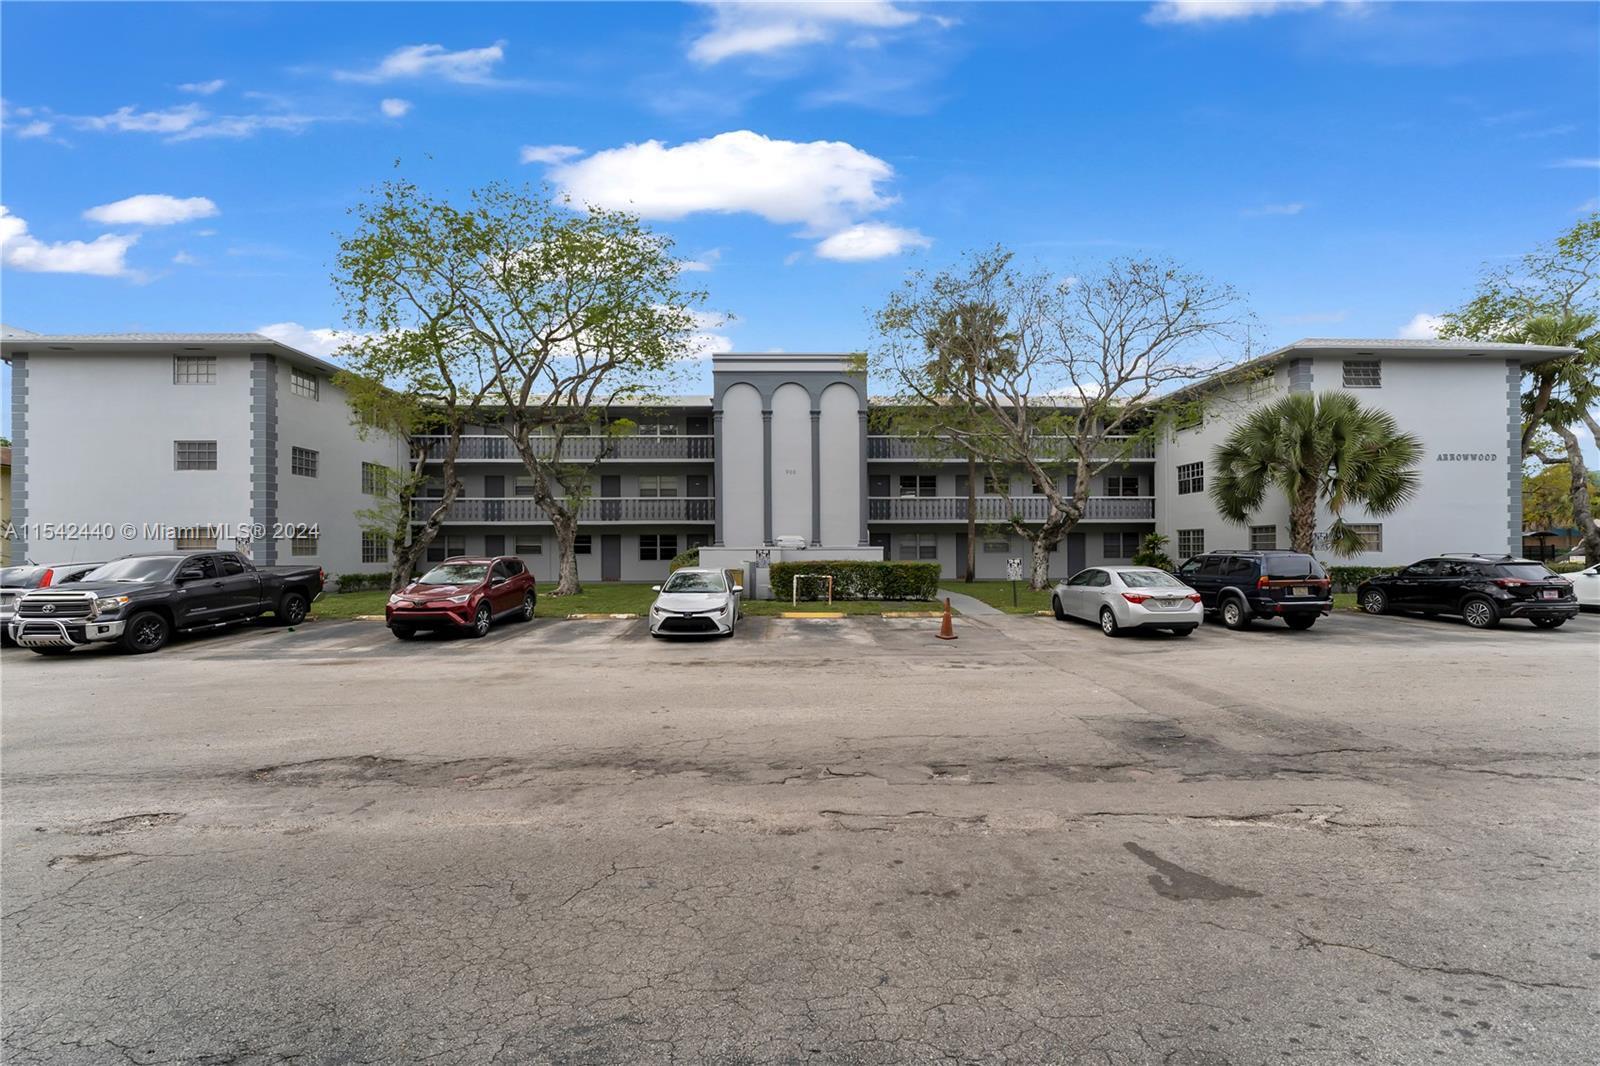 Photo of 900 Tallwood Ave #304 in Hollywood, FL